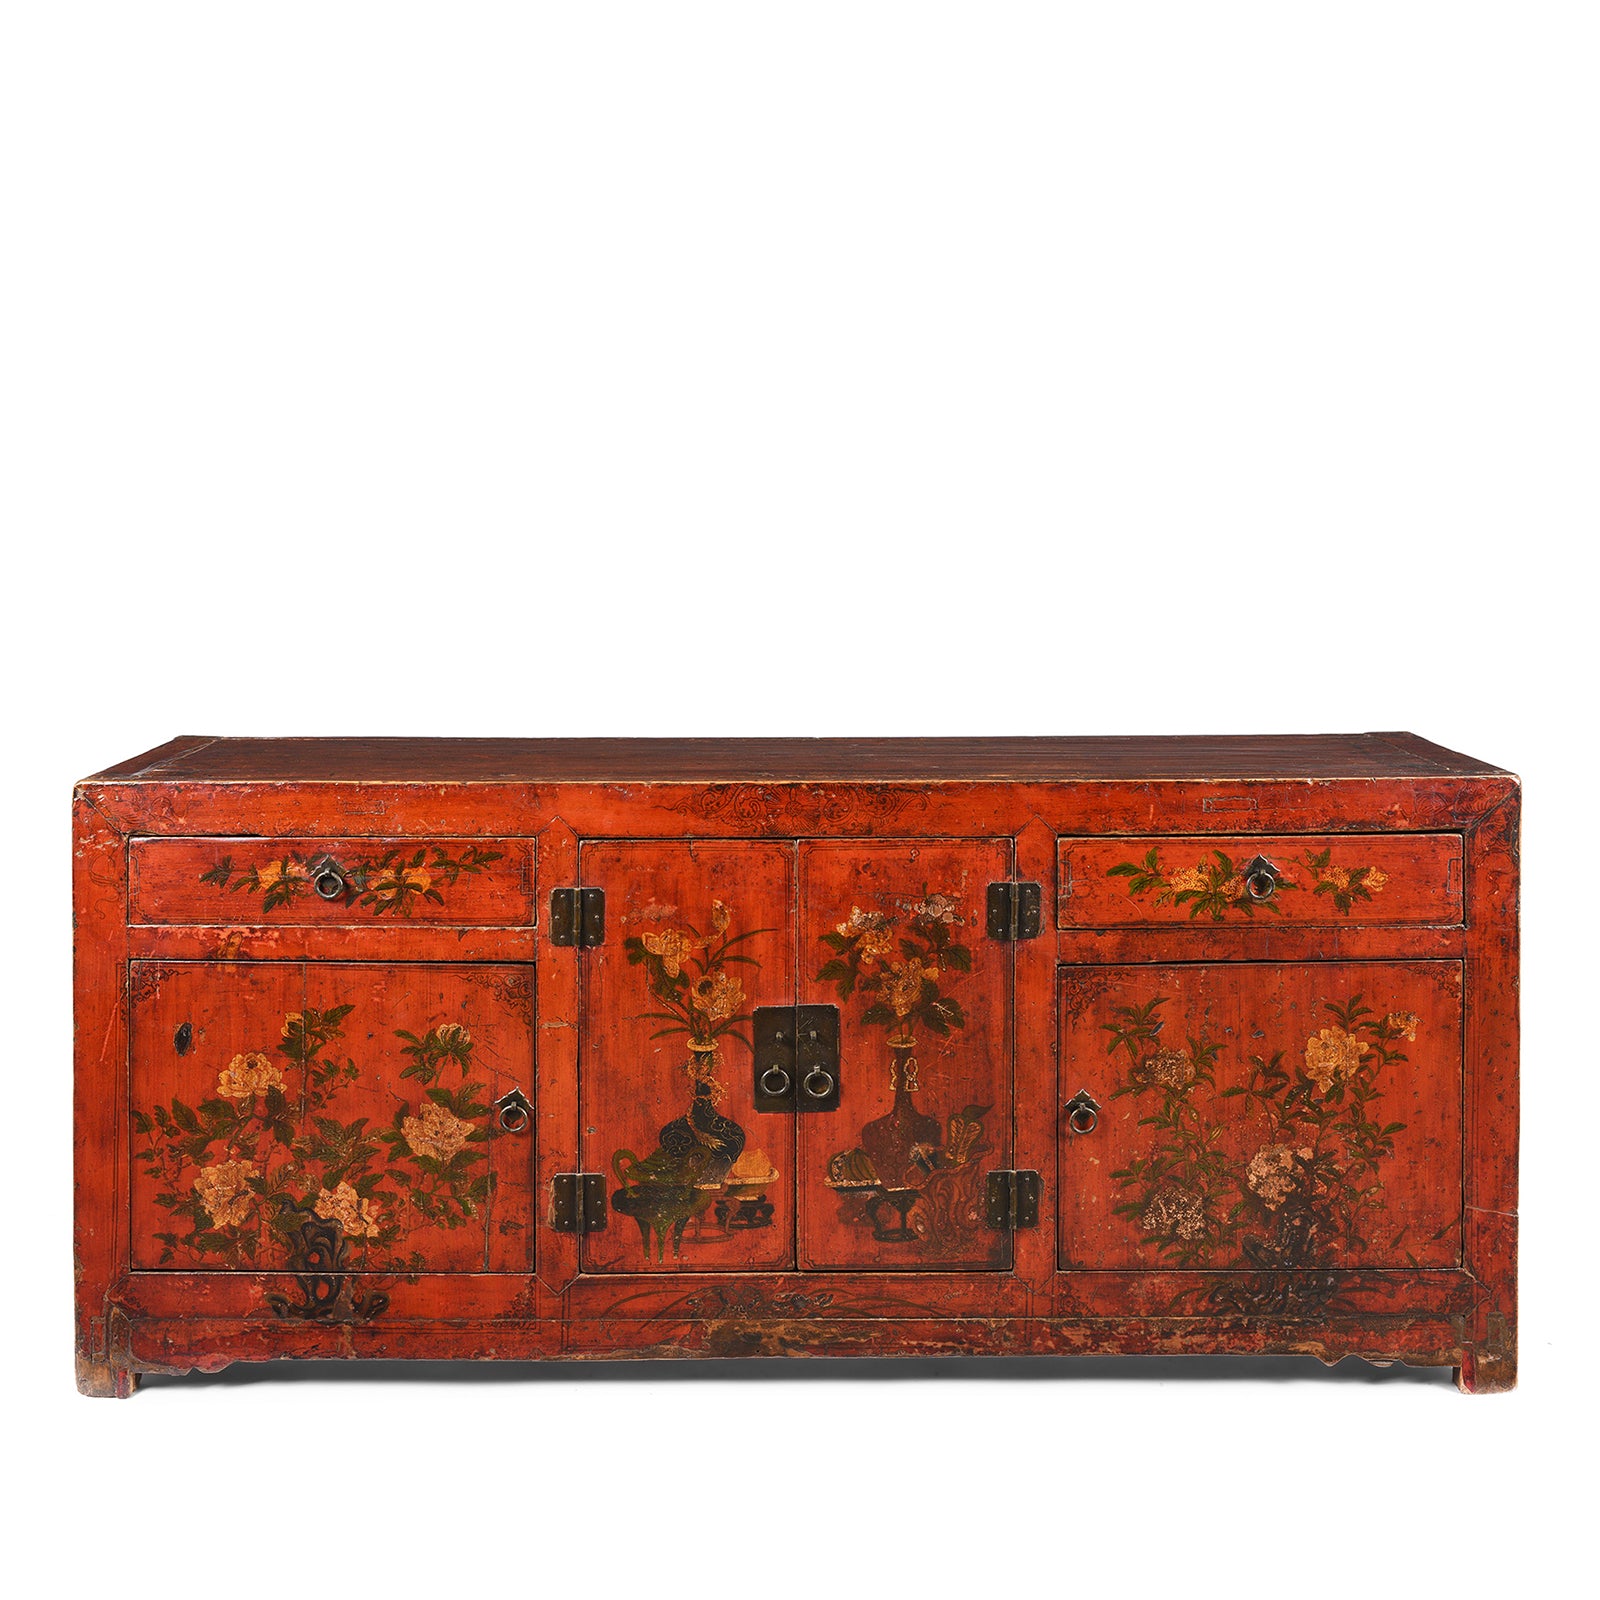 Antique Chinese Red Lacquer Painted Qinghai Sideboard - 19thC | Indigo Antiques